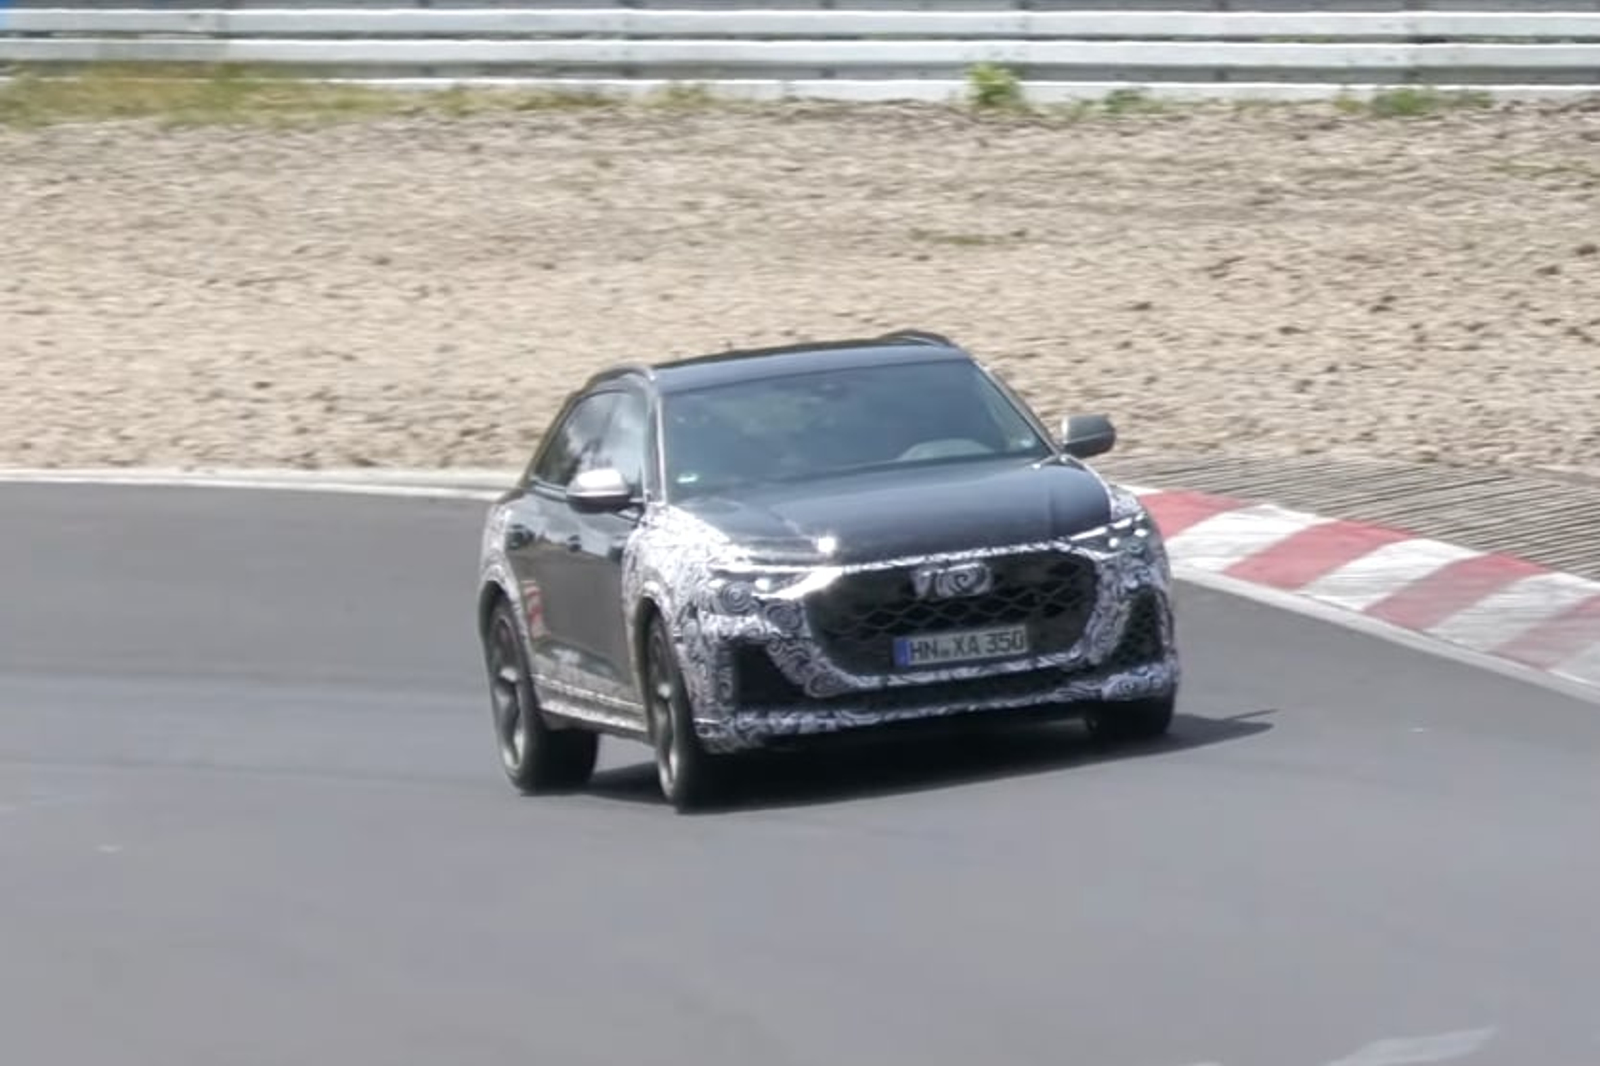 video, spy shots, sports cars, nurburgring, new audi rs q8 prototype spied testing at nurburgring